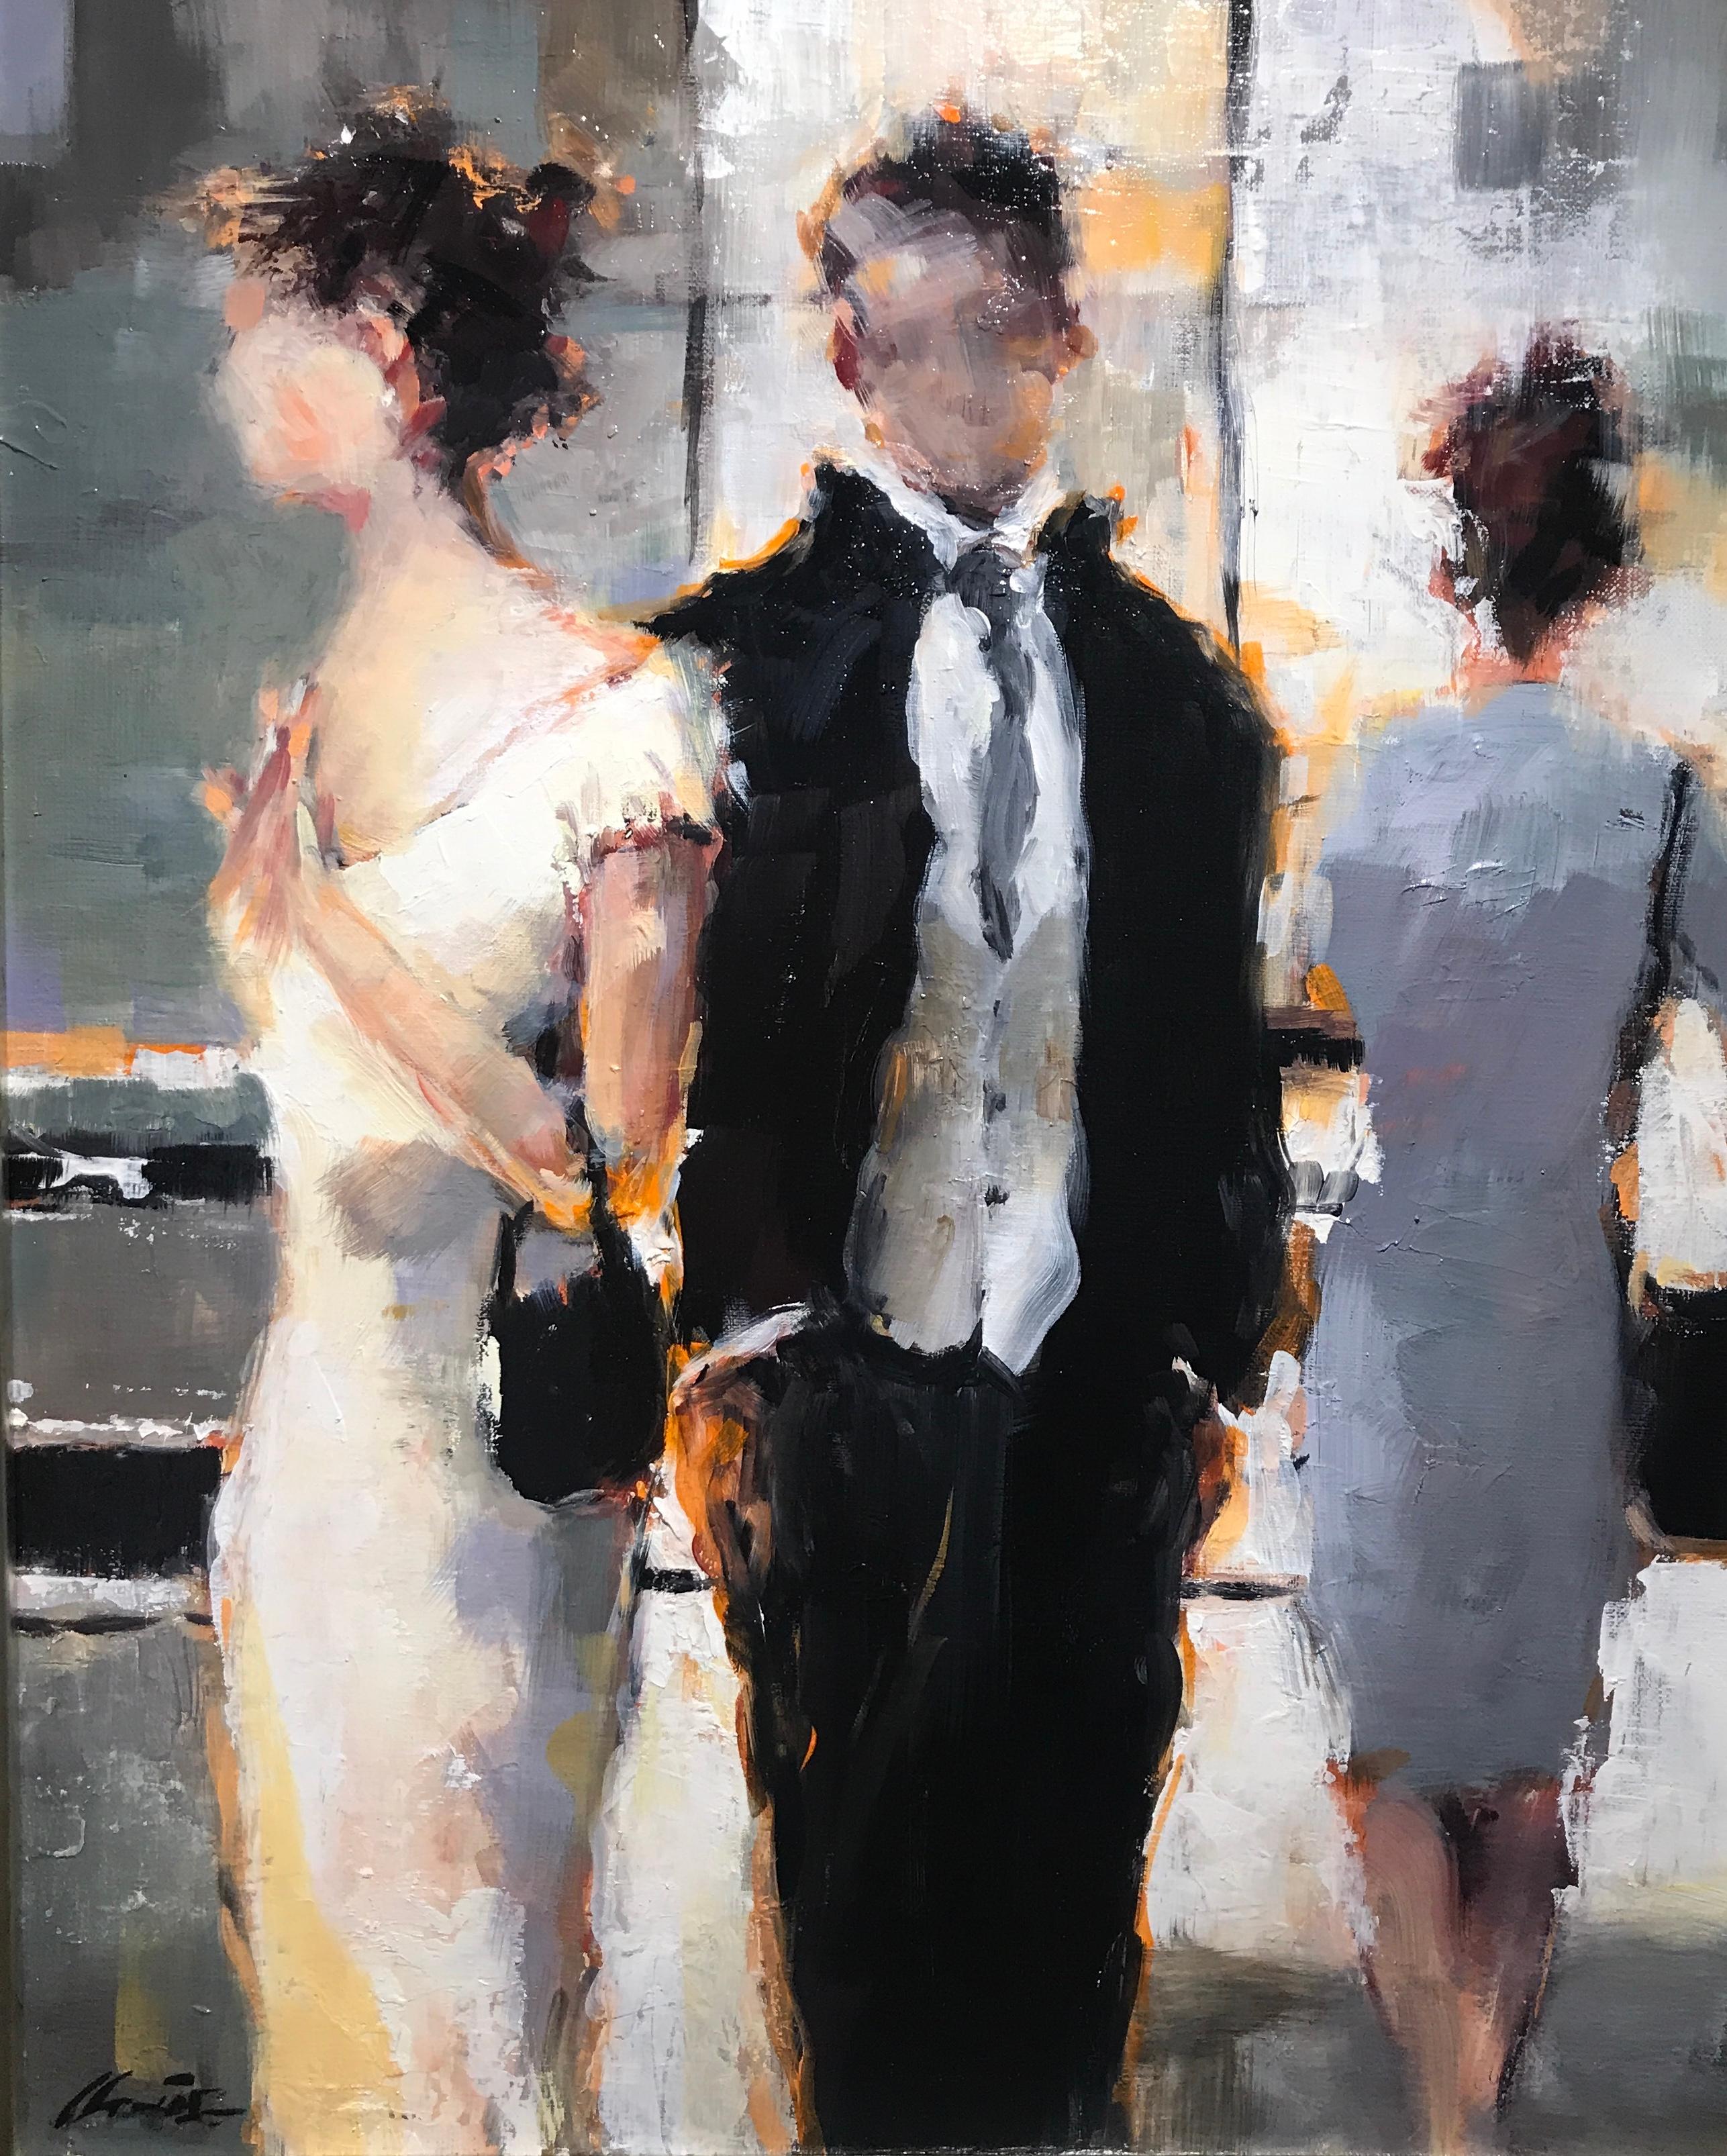 'Can't Let Go' is a medium size framed Impressionist oil on canvas figurative painting created by Irish artist Lorraine Christie in 2019. Featuring a palette made of black, white, grey and cream tones accented with warm orange touches, this vertical